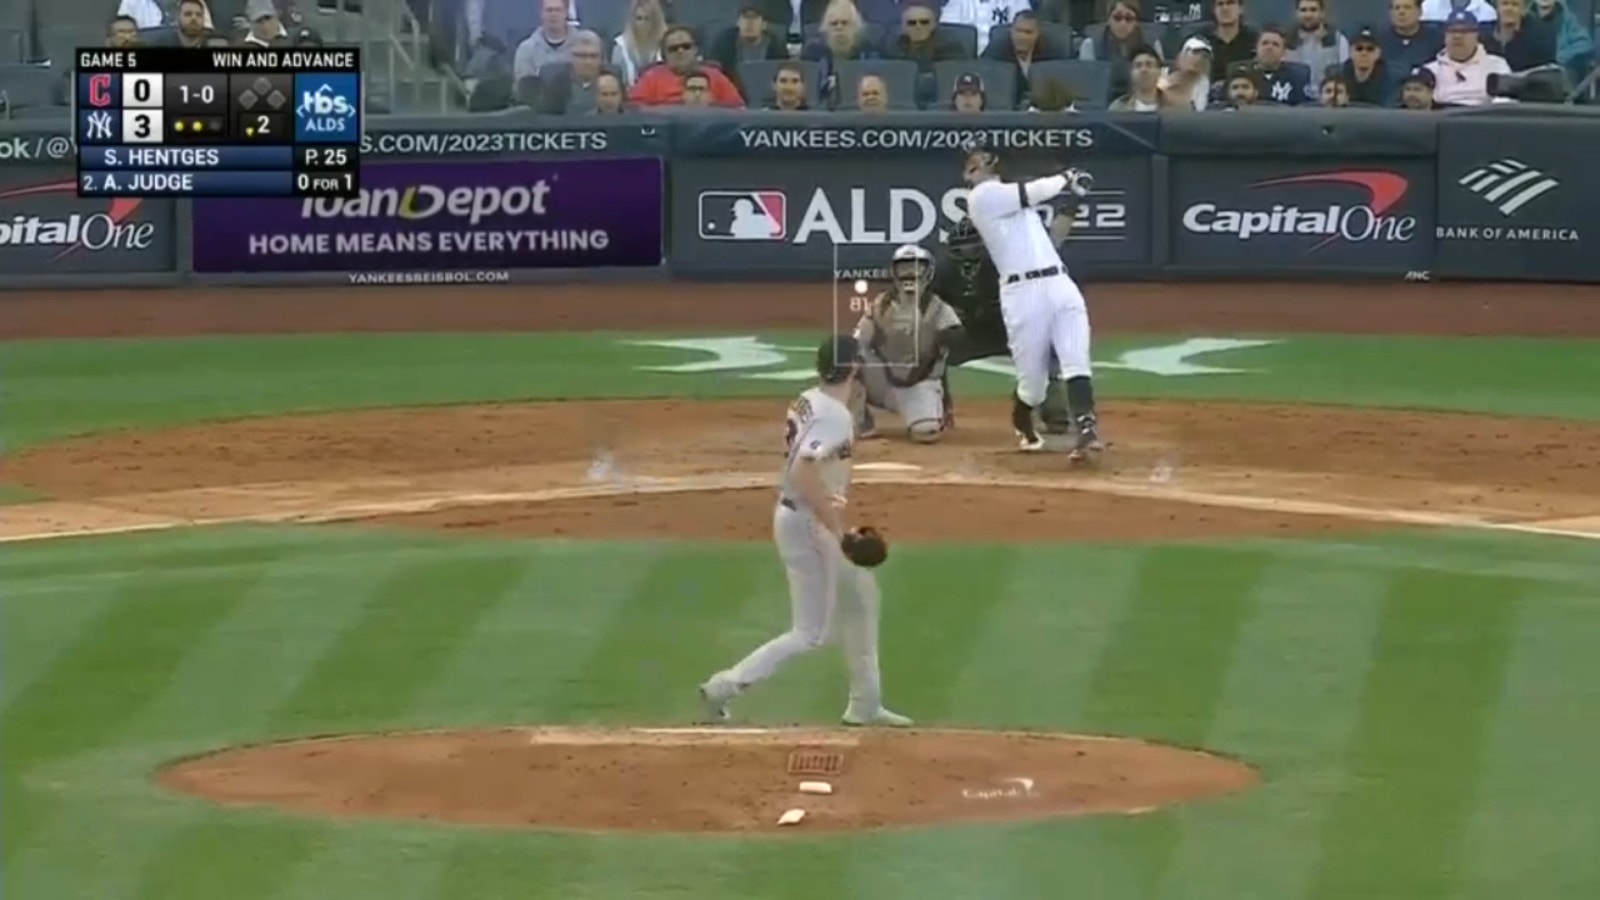 Aaron Judges launches solo home run to extend Yankees' lead